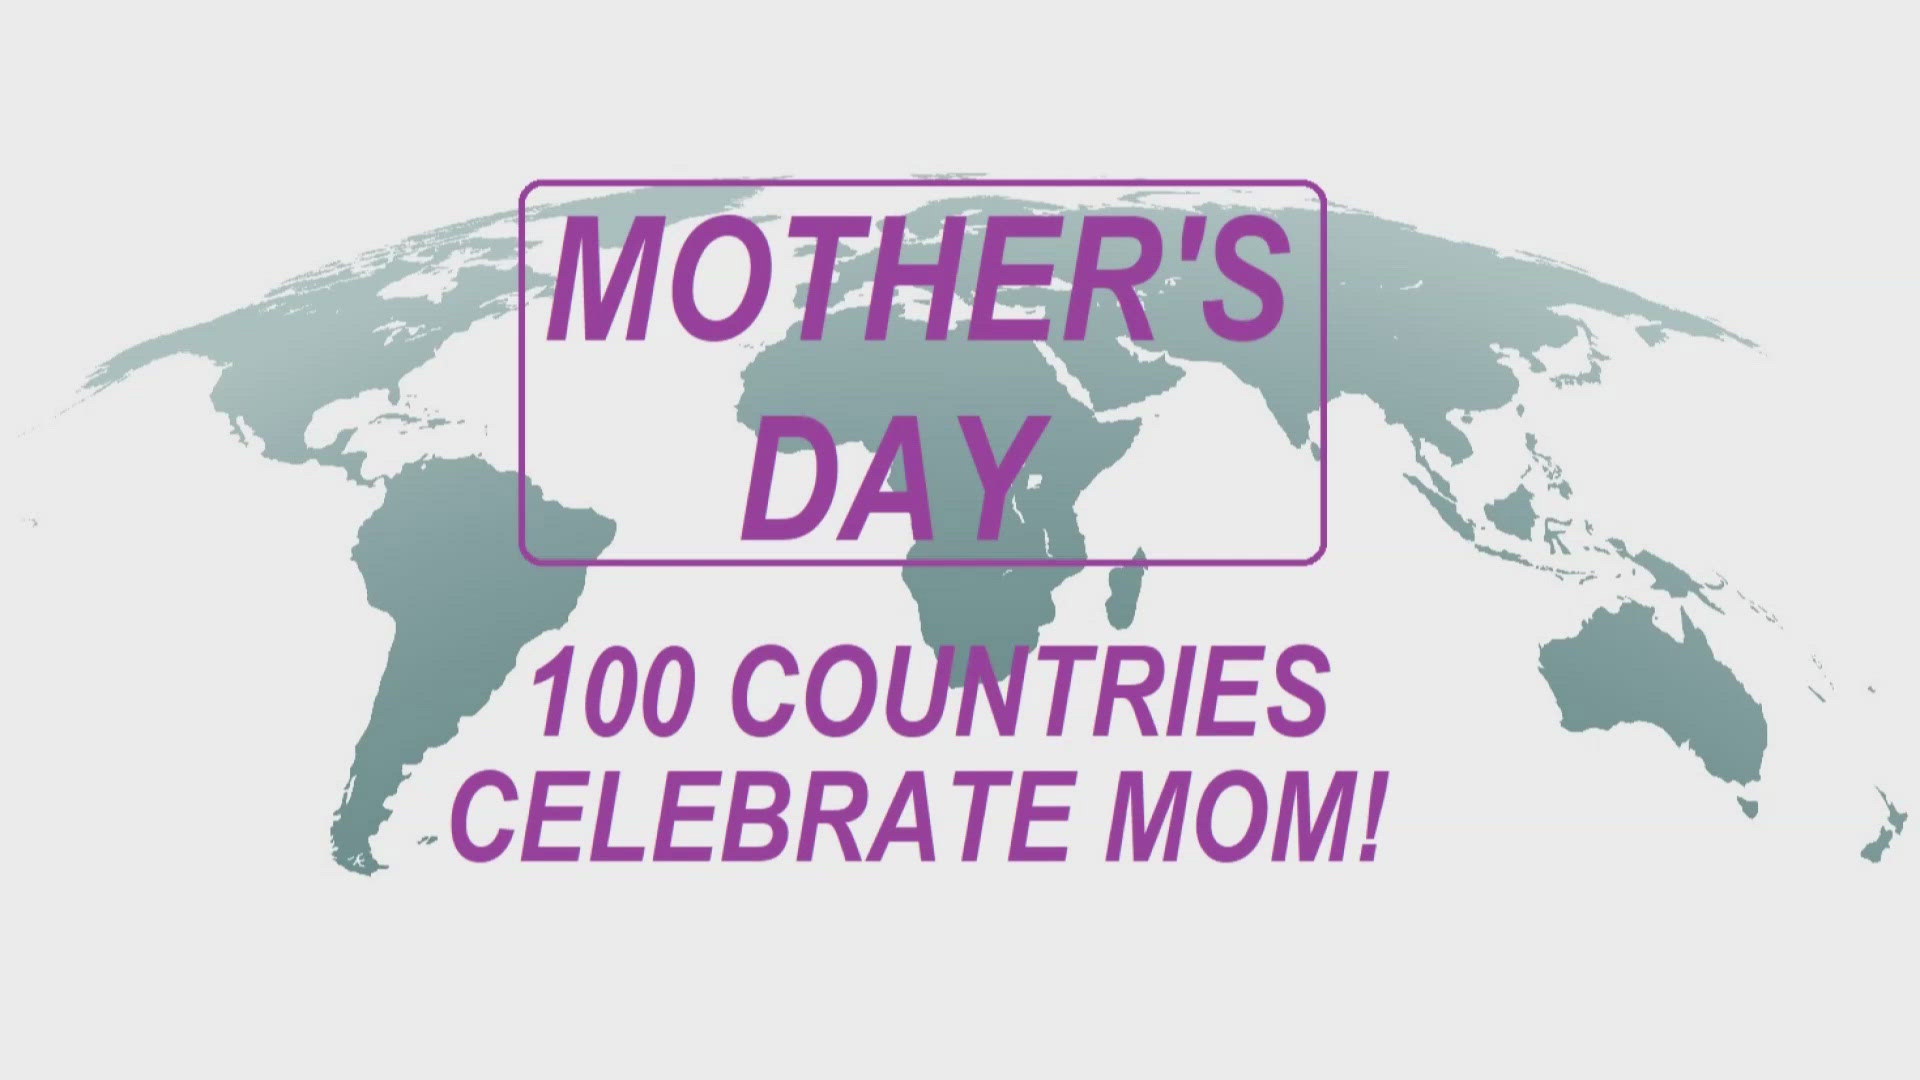 2WTK looks into the one thing that unites us all: Mothers.